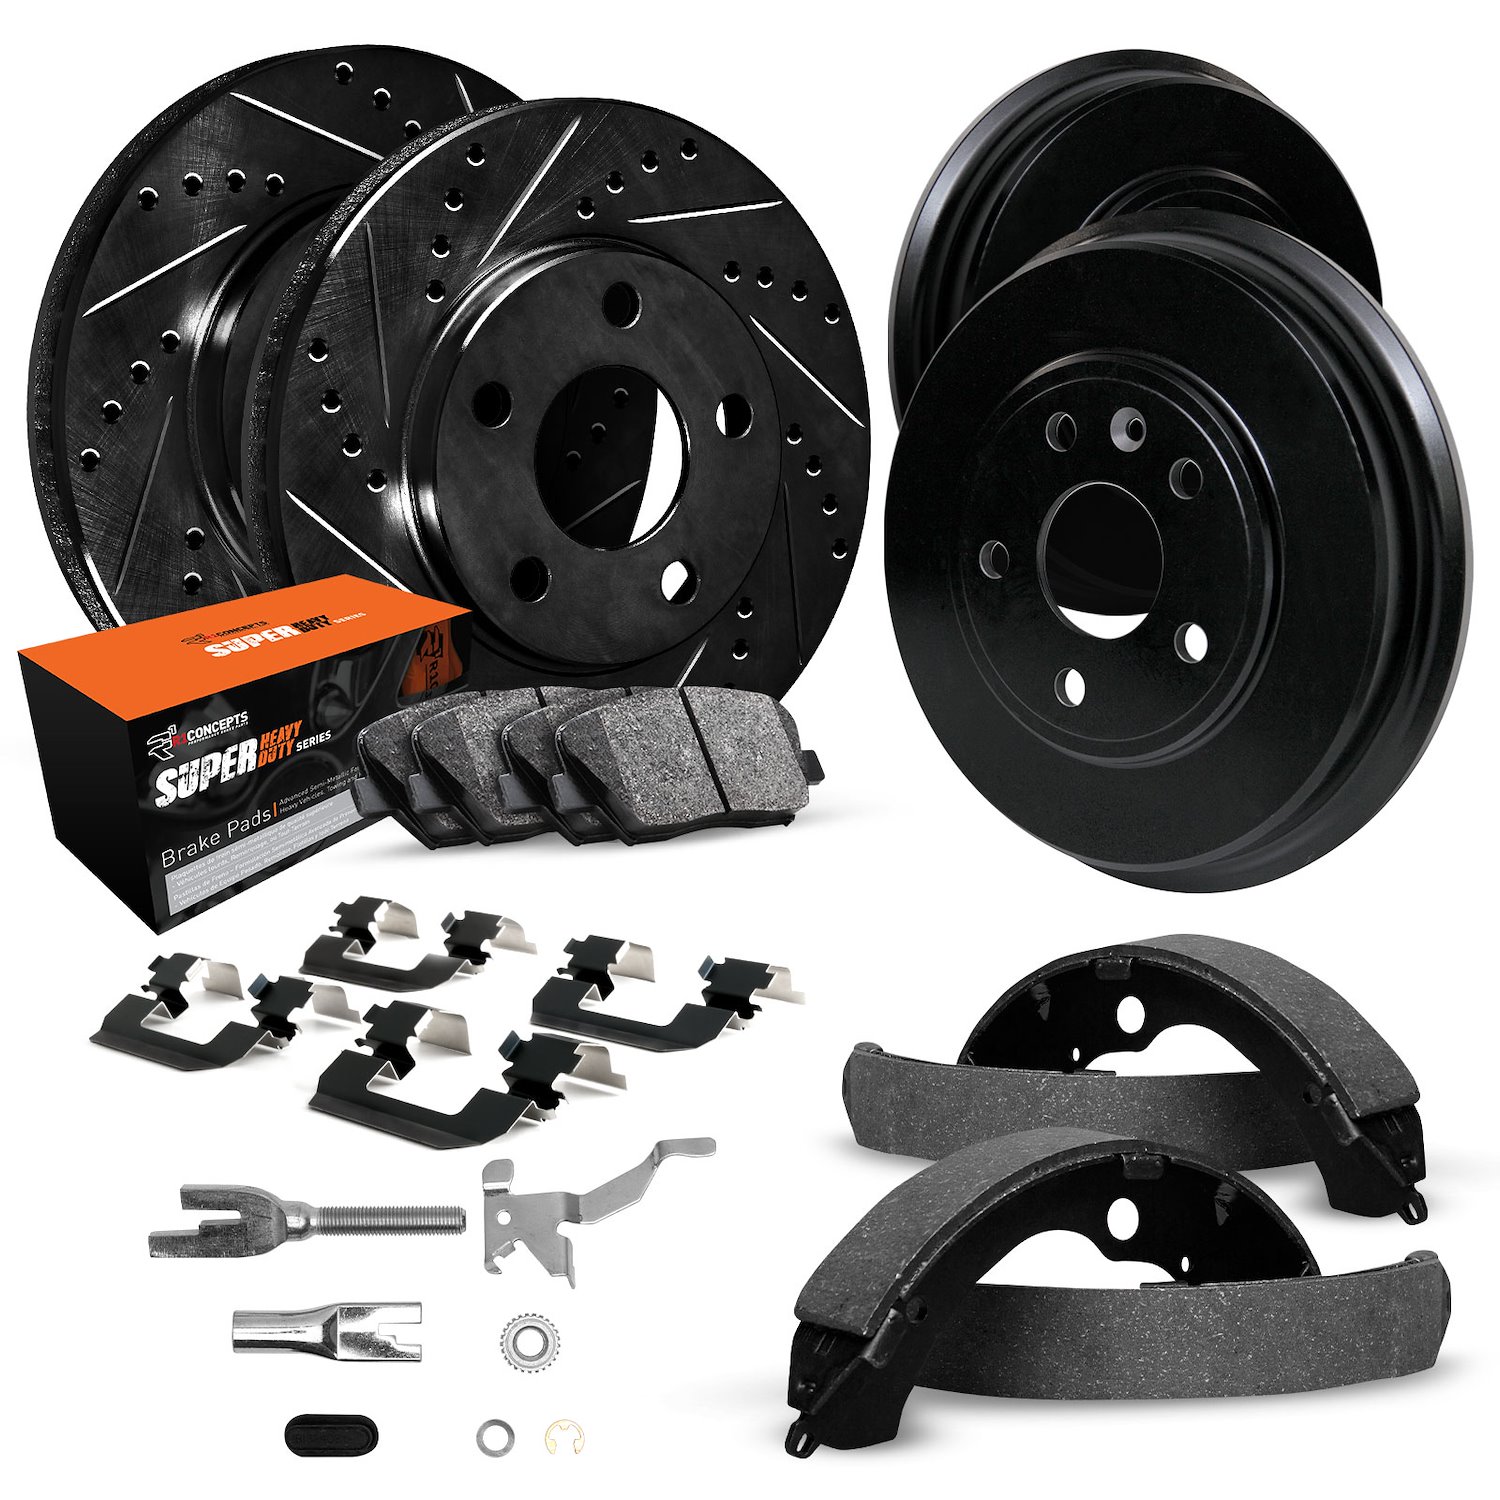 E-Line Drilled/Slotted Black Rotor & Drum Set w/Super-Duty Pads, Shoes, Hardware/Adjusters, 1986-1986 Ford/Lincoln/Mercury/Mazda